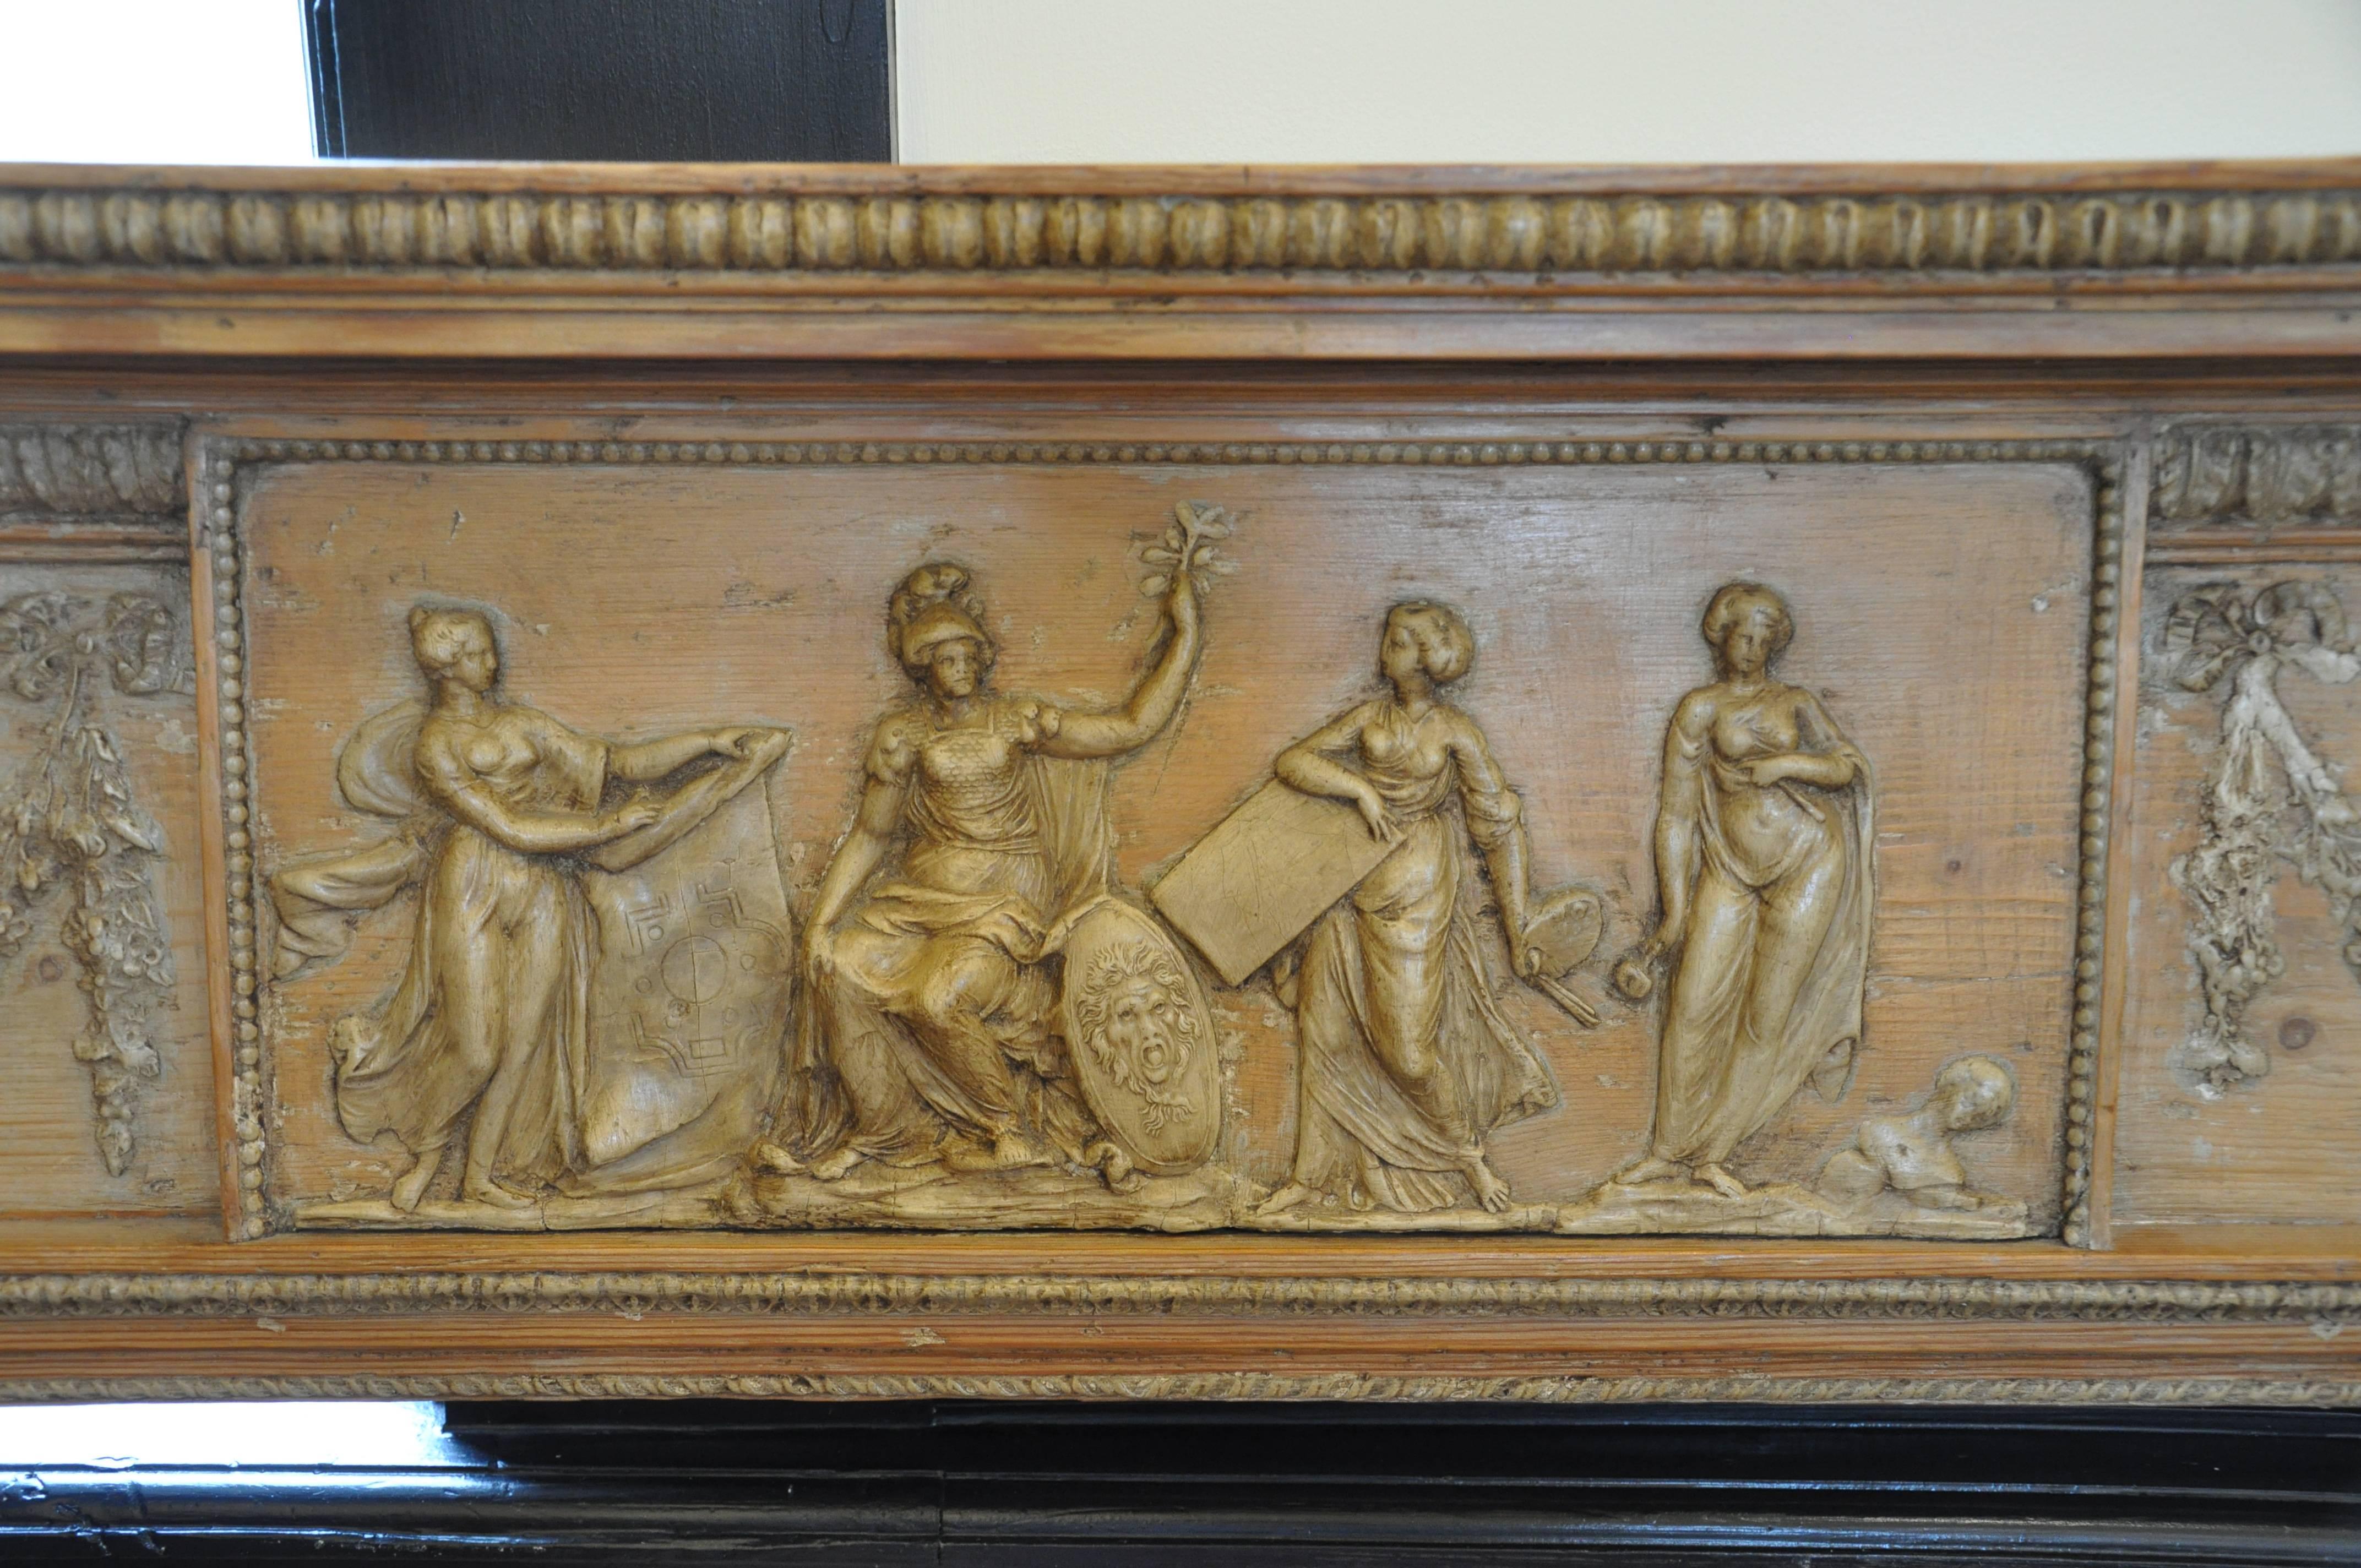 Period Irish influenced pine and gesso mantel or chimney piece.

Pine with neoclassical gessoed reliefs.
Allegorical figures: Minerva and the Muses, representing 